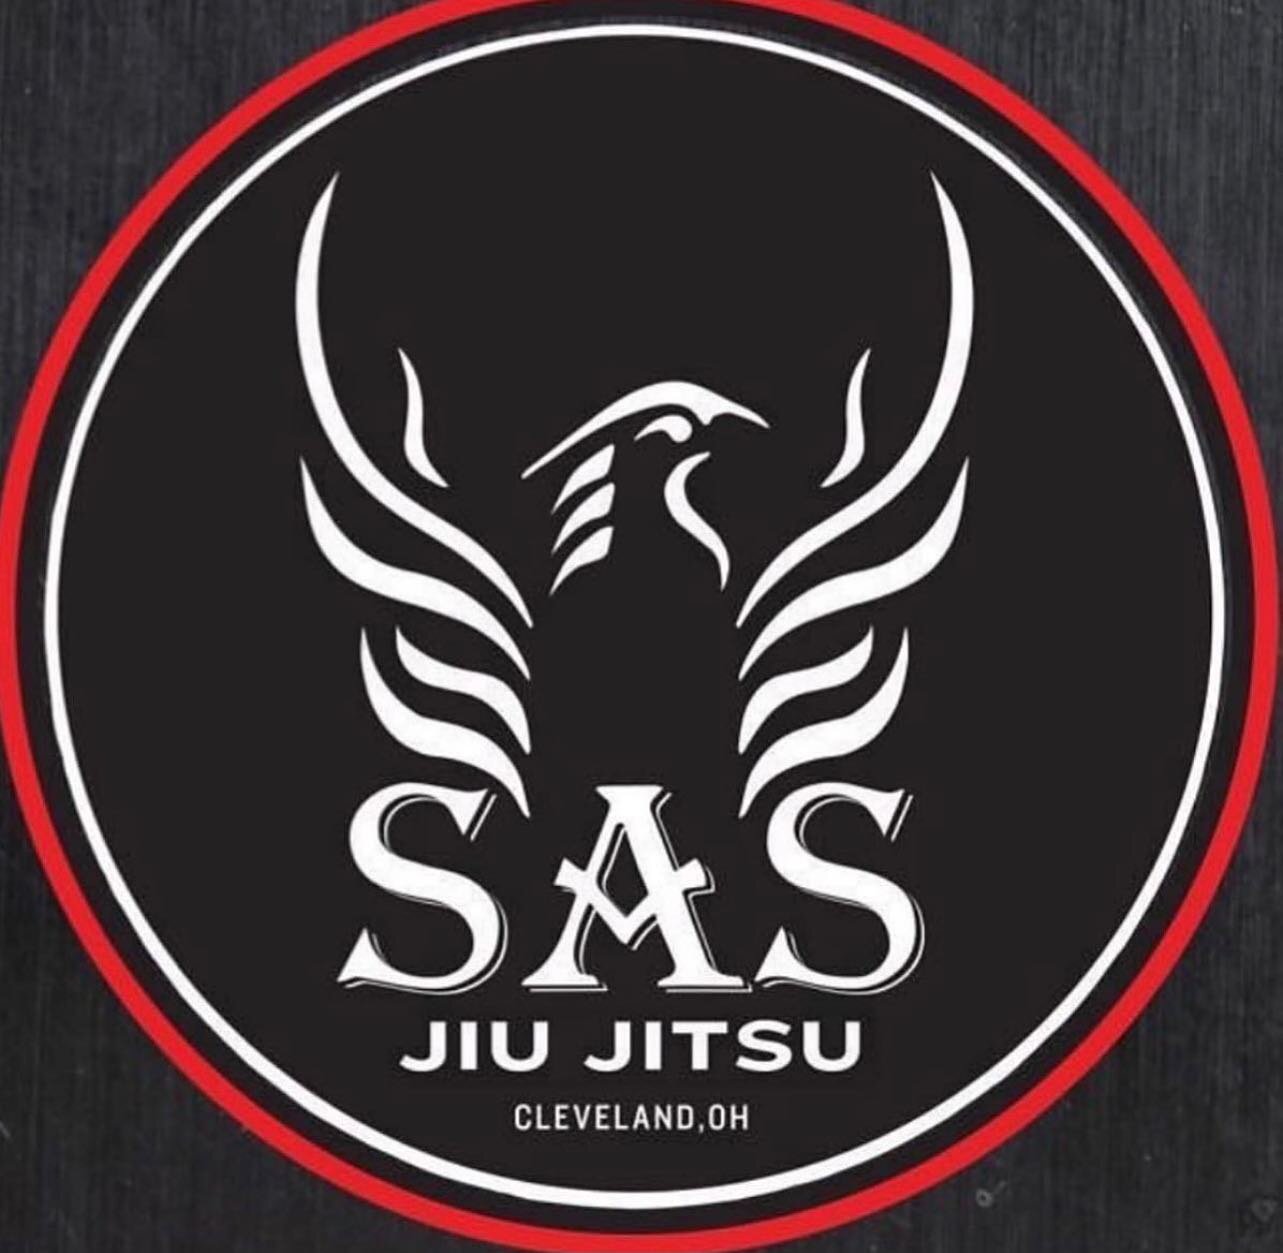 Monday: No-GI Jiu Jitsu with Coach Wyatt Routson @7pm 
Come up and join us. 
Self Defense.&nbsp;&nbsp;
Grappling.&nbsp;&nbsp;
Competition.&nbsp;&nbsp;
Better your Health by increasing your self esteem, gain improved focus and discipline. 
Whatever yo